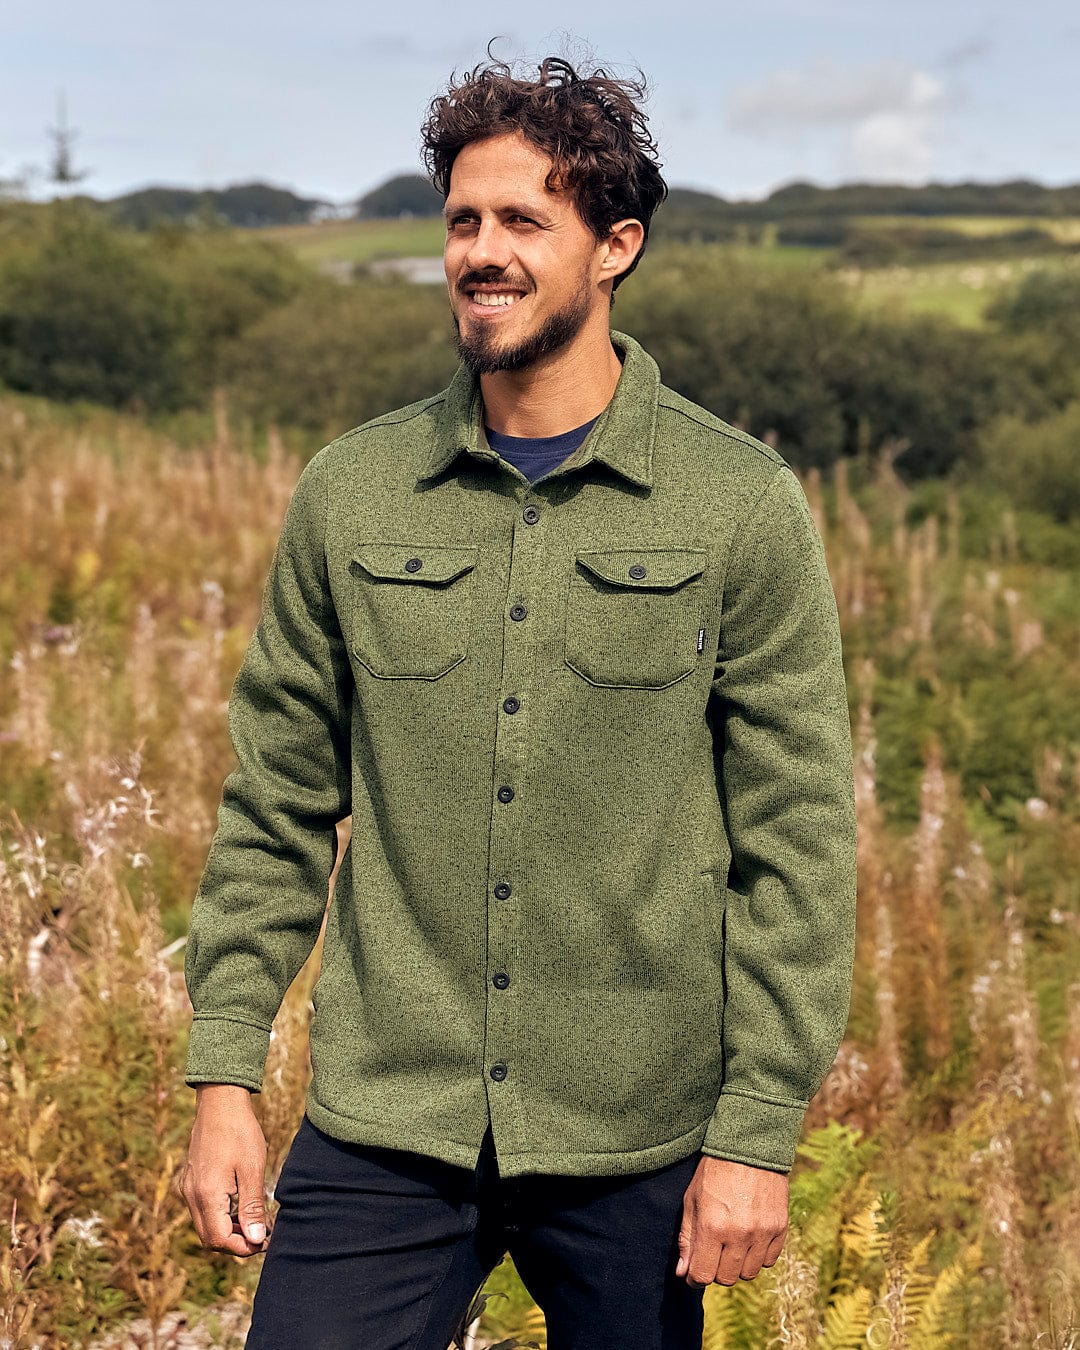 A man in a stylish green Saltrock Levick Mens Long Sleeve Shirt standing in a field with Saltrock branding.